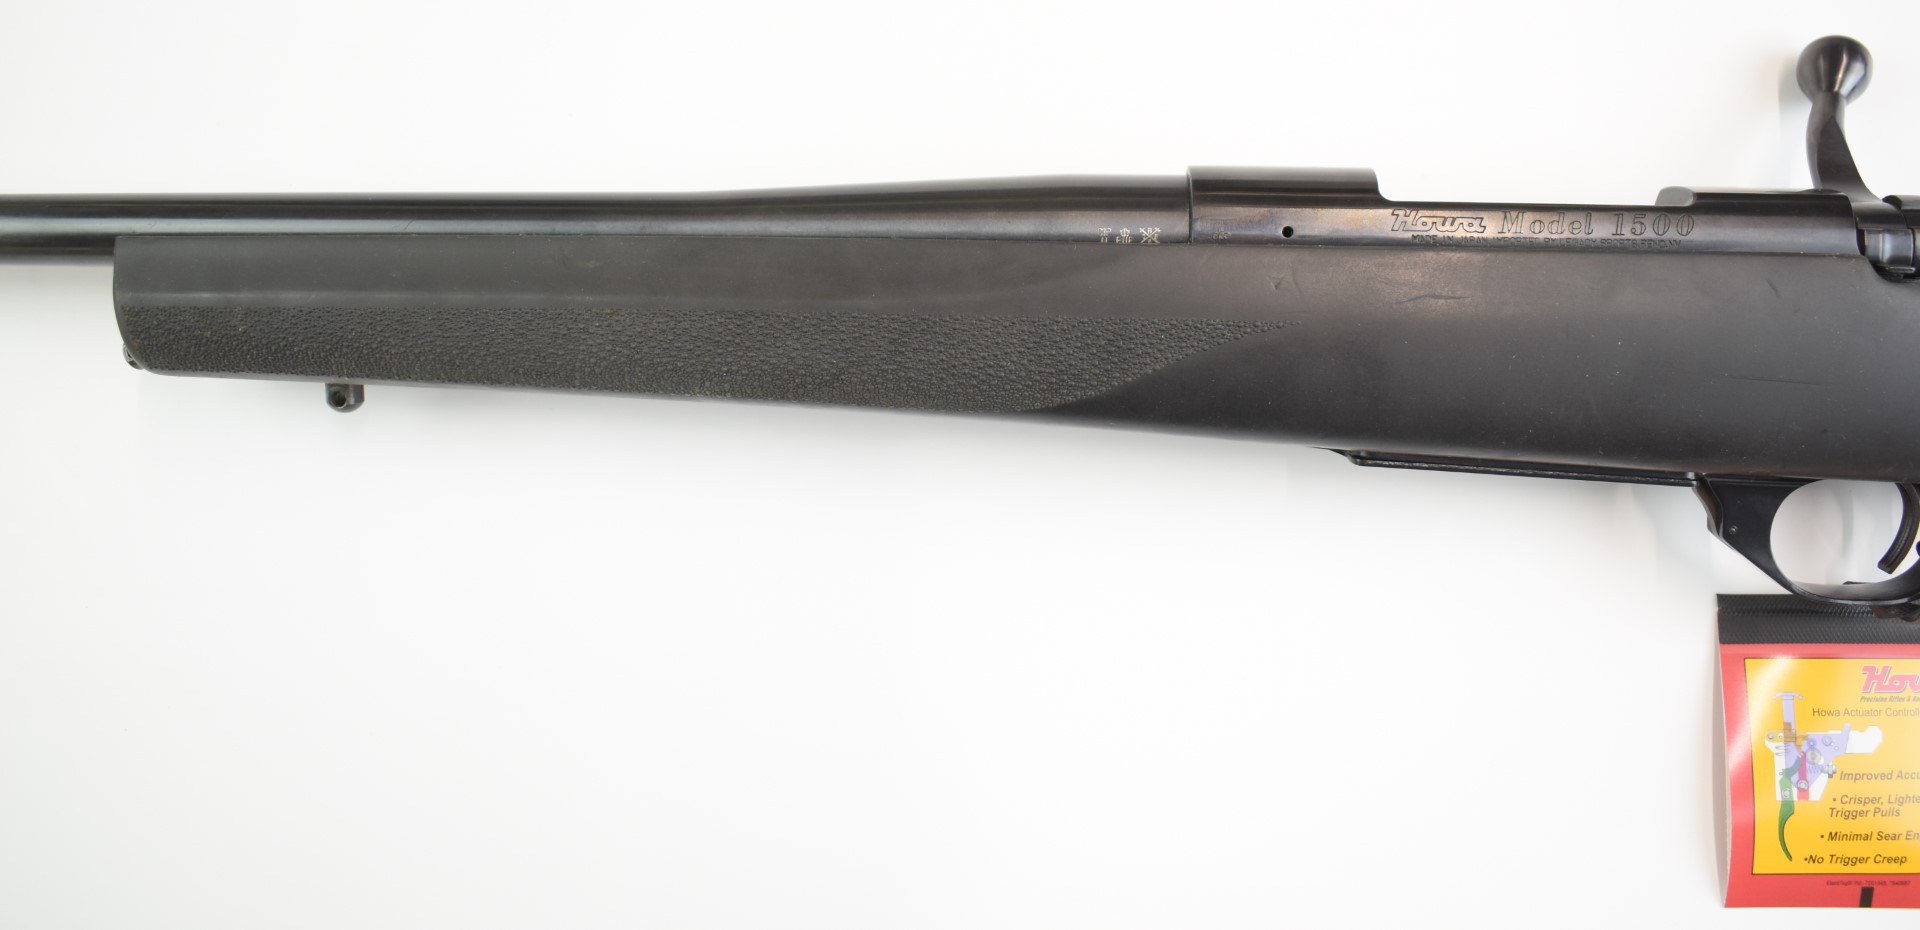 Howa Model 1500 Black .308 bolt-action rifle with composite stock, textured semi-pistol grip and - Image 18 of 26